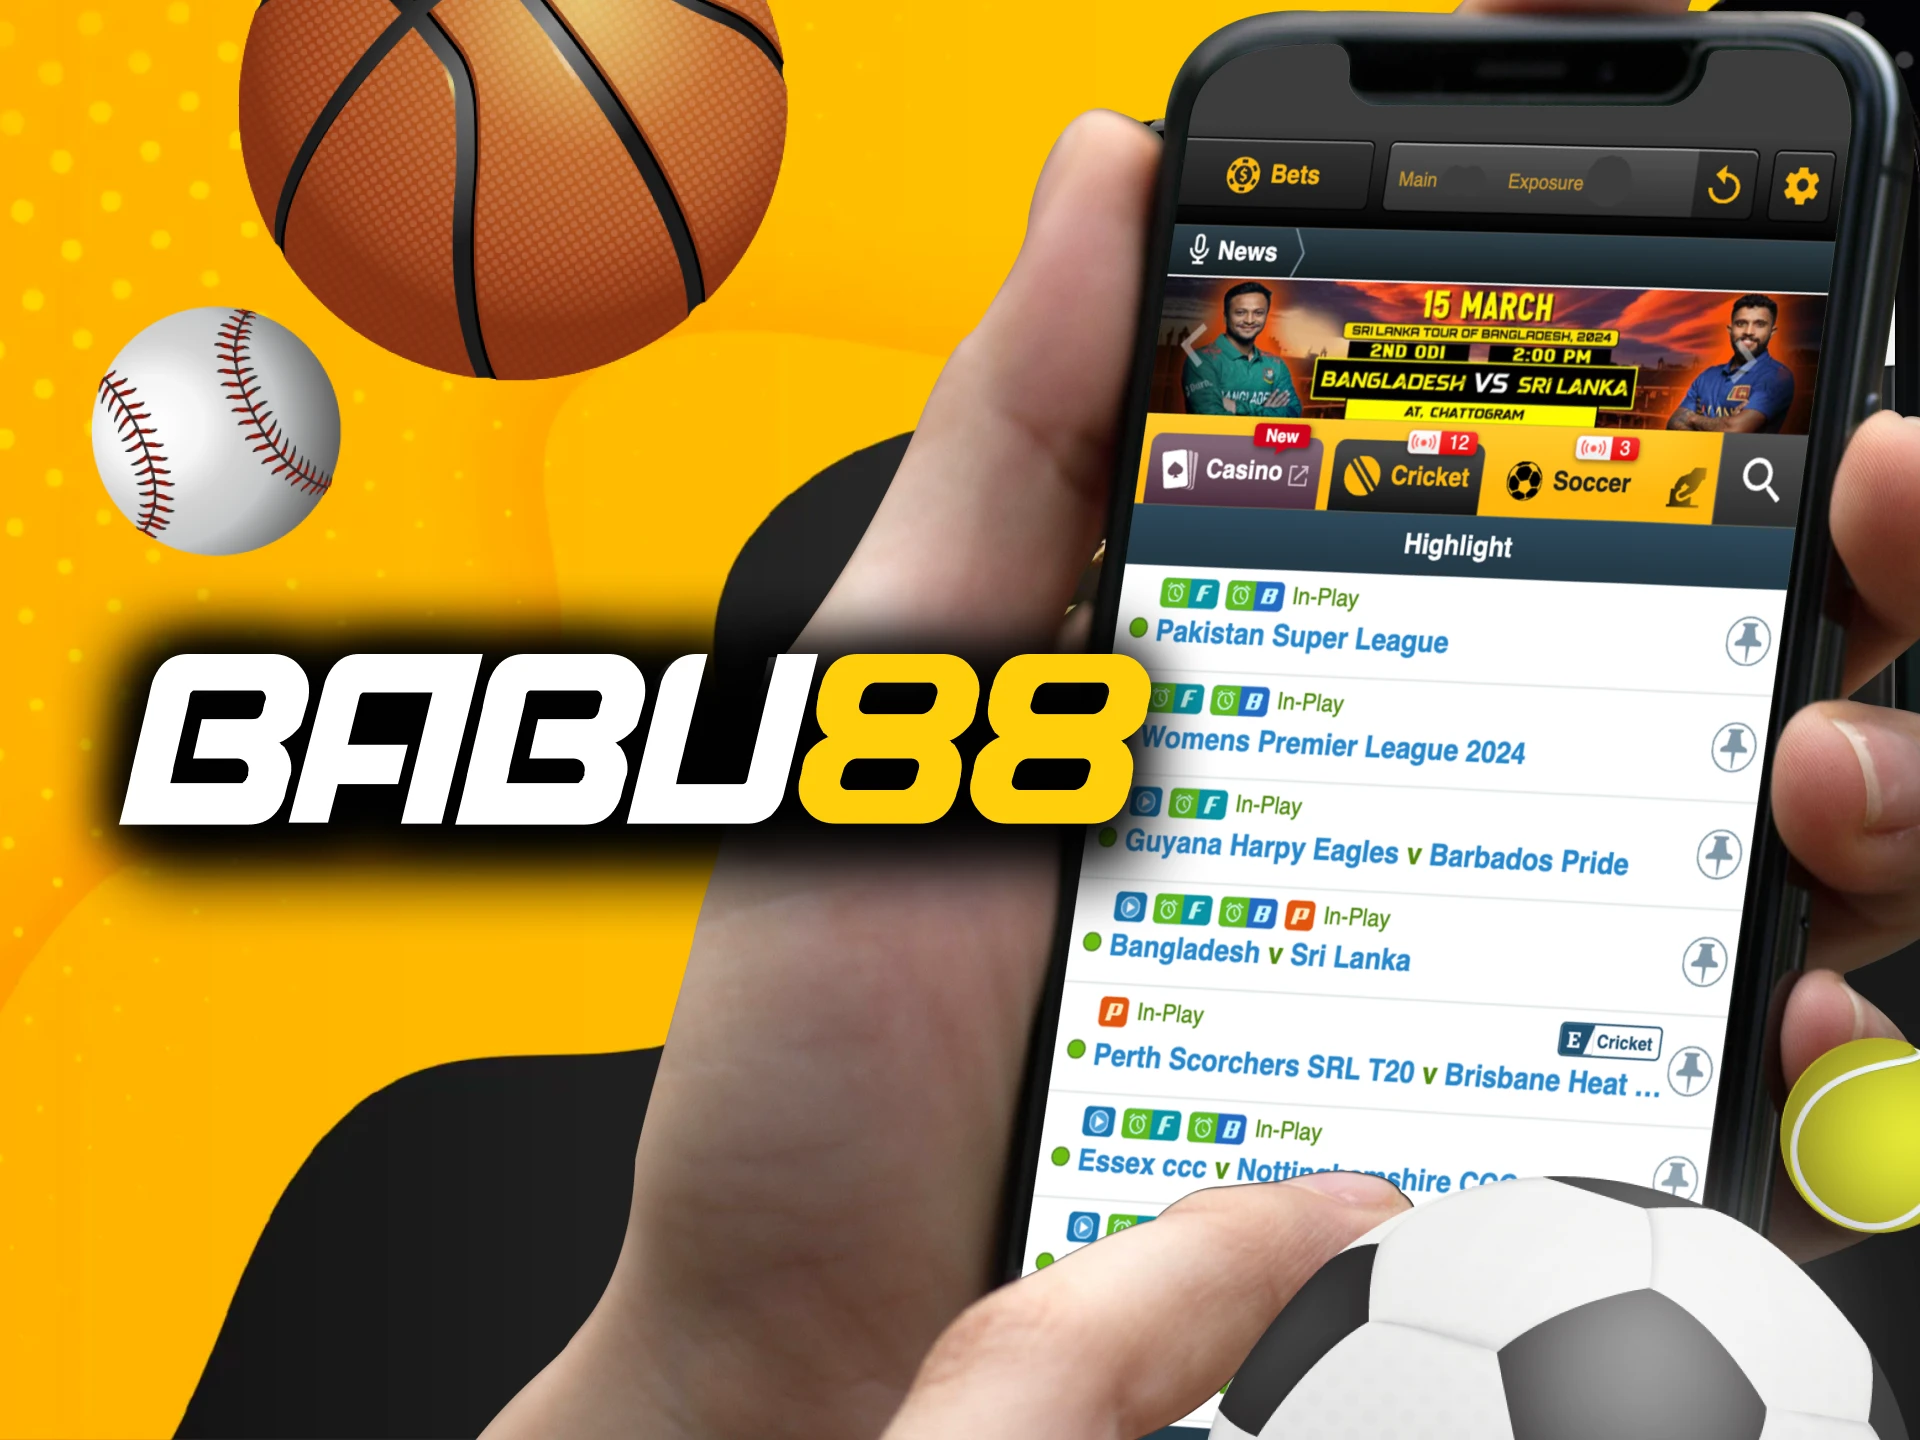 Can I bet in IPL at Babu88 online casino from my phone.